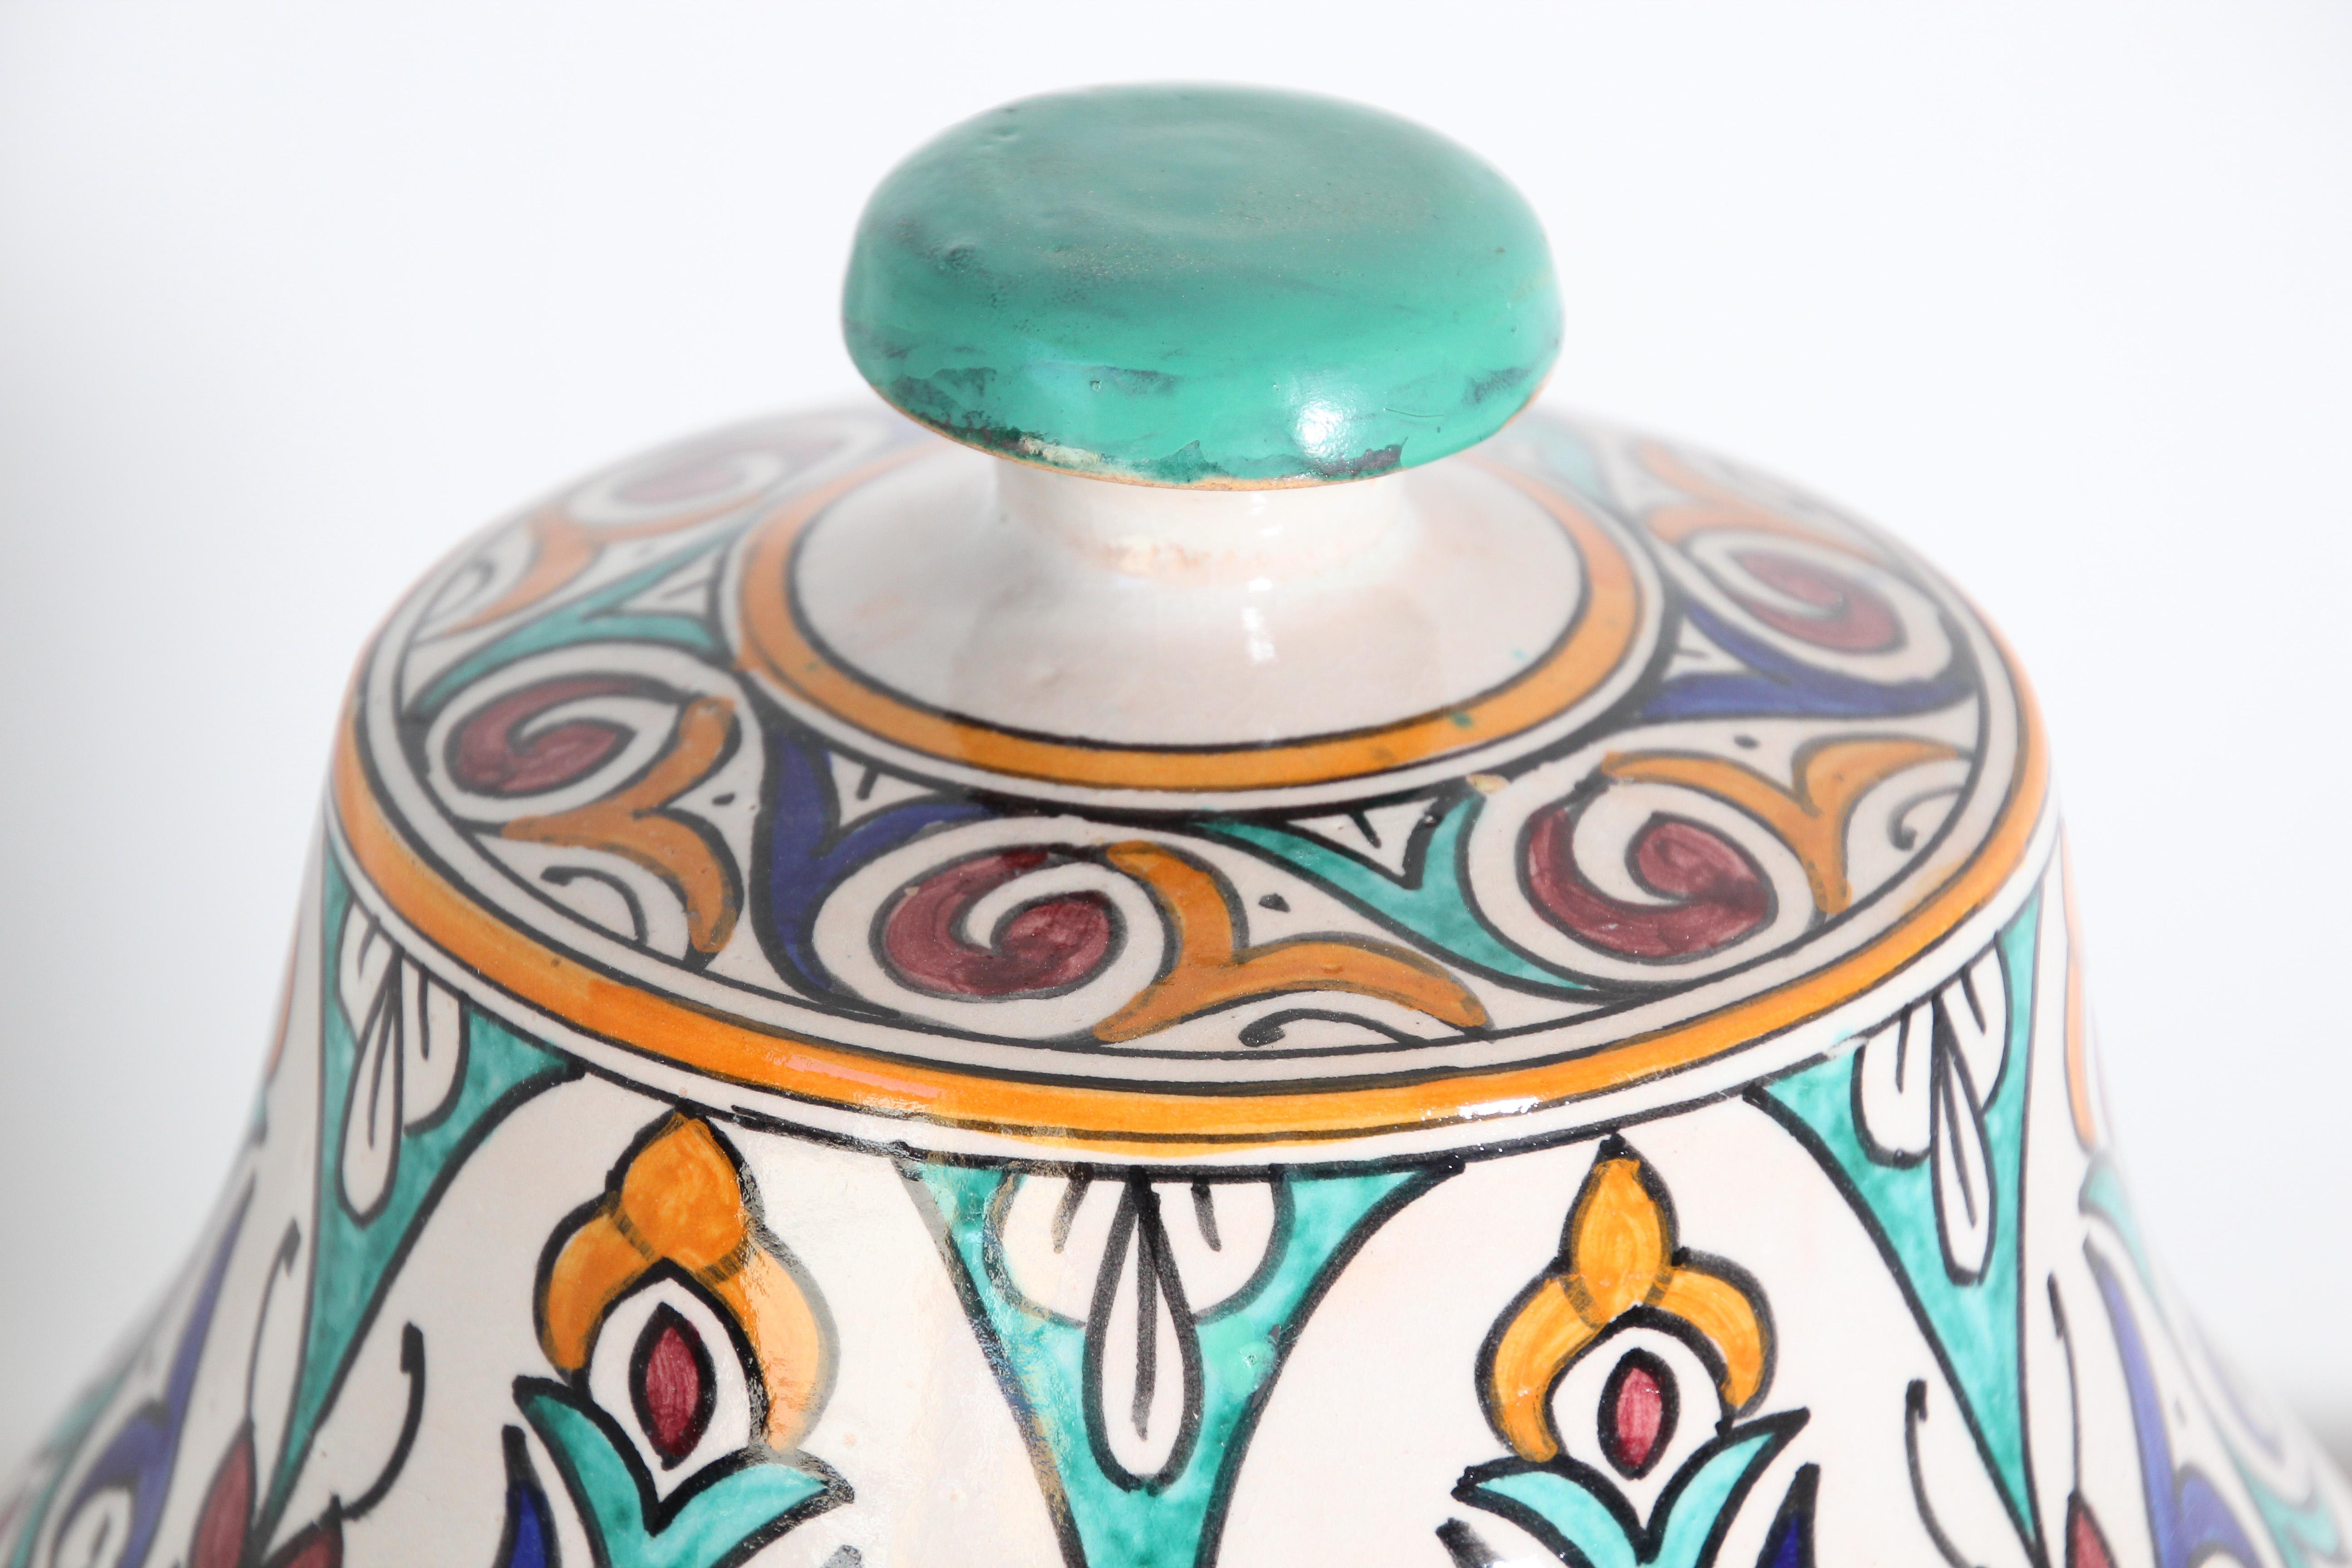 Glazed Moorish Ceramic Covered Jar Handcrafted in Fez Morocco In Good Condition For Sale In North Hollywood, CA